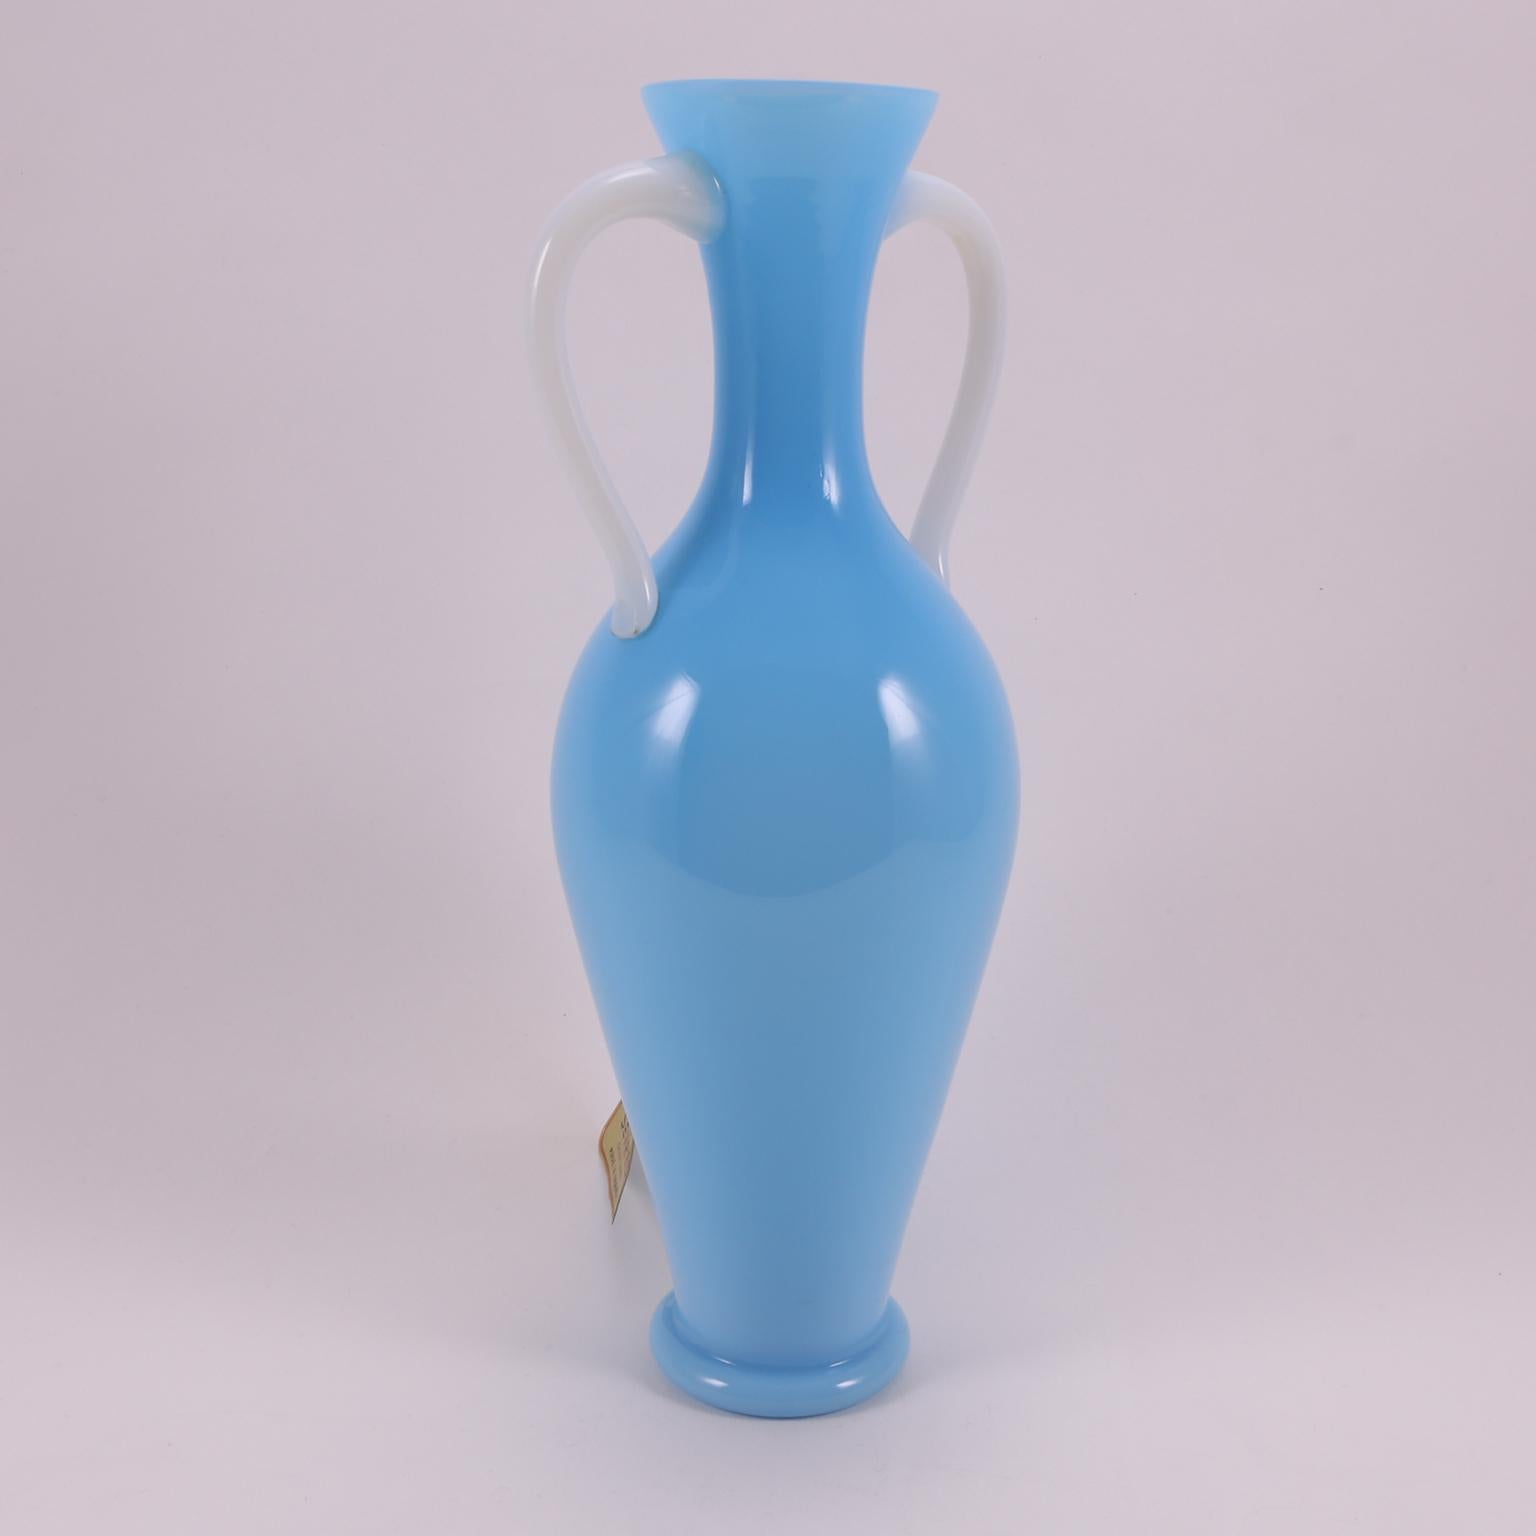 Early 20th Century Art Deco French Sèvres Light Turquoise Handblown Opaline Glass Vase, 1920 For Sale